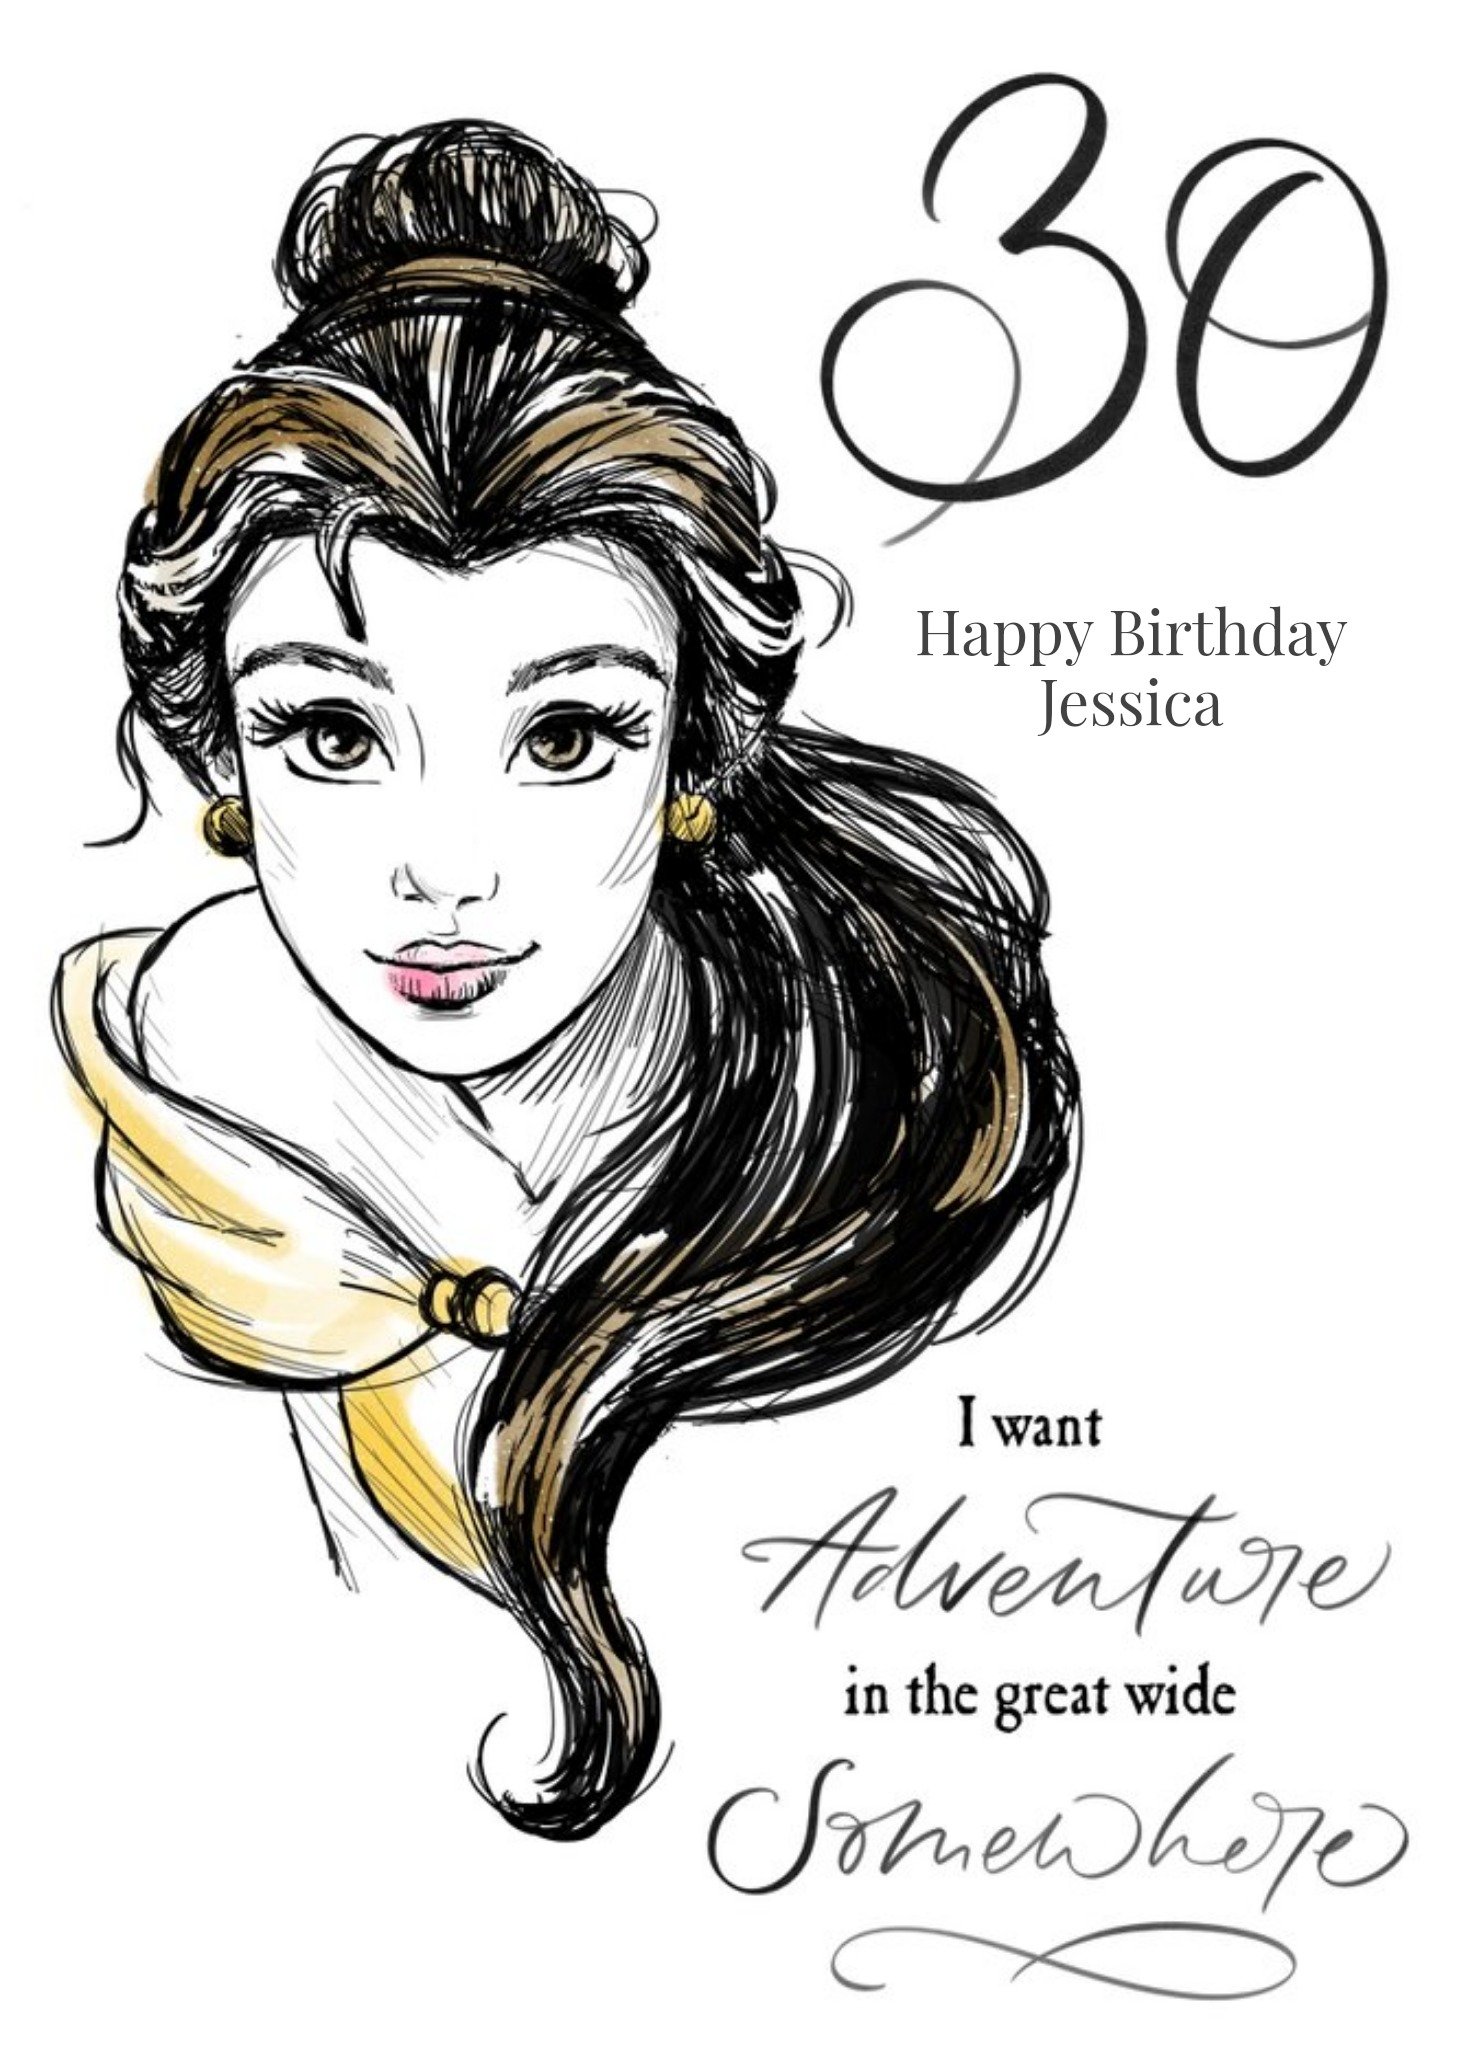 Disney Princesses Disney Adult Princess Belle, 30th. I Want Adventure In the Great Wide Somewhere Bi